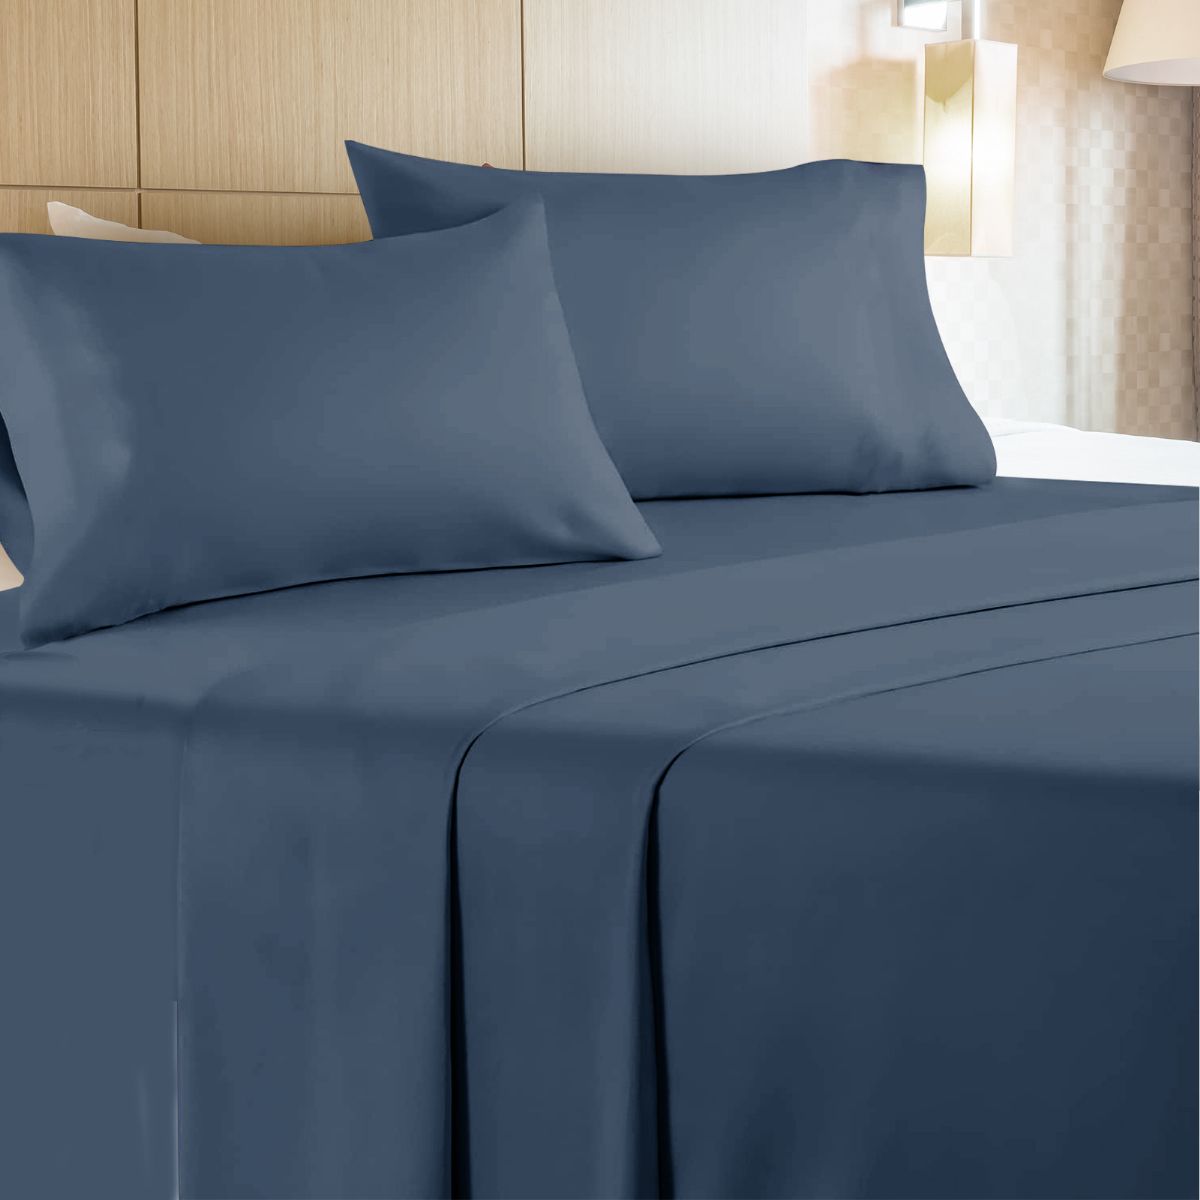 6 Wholesale 4 Piece Microfiber Bed Sheet Set Twin Size In Navy